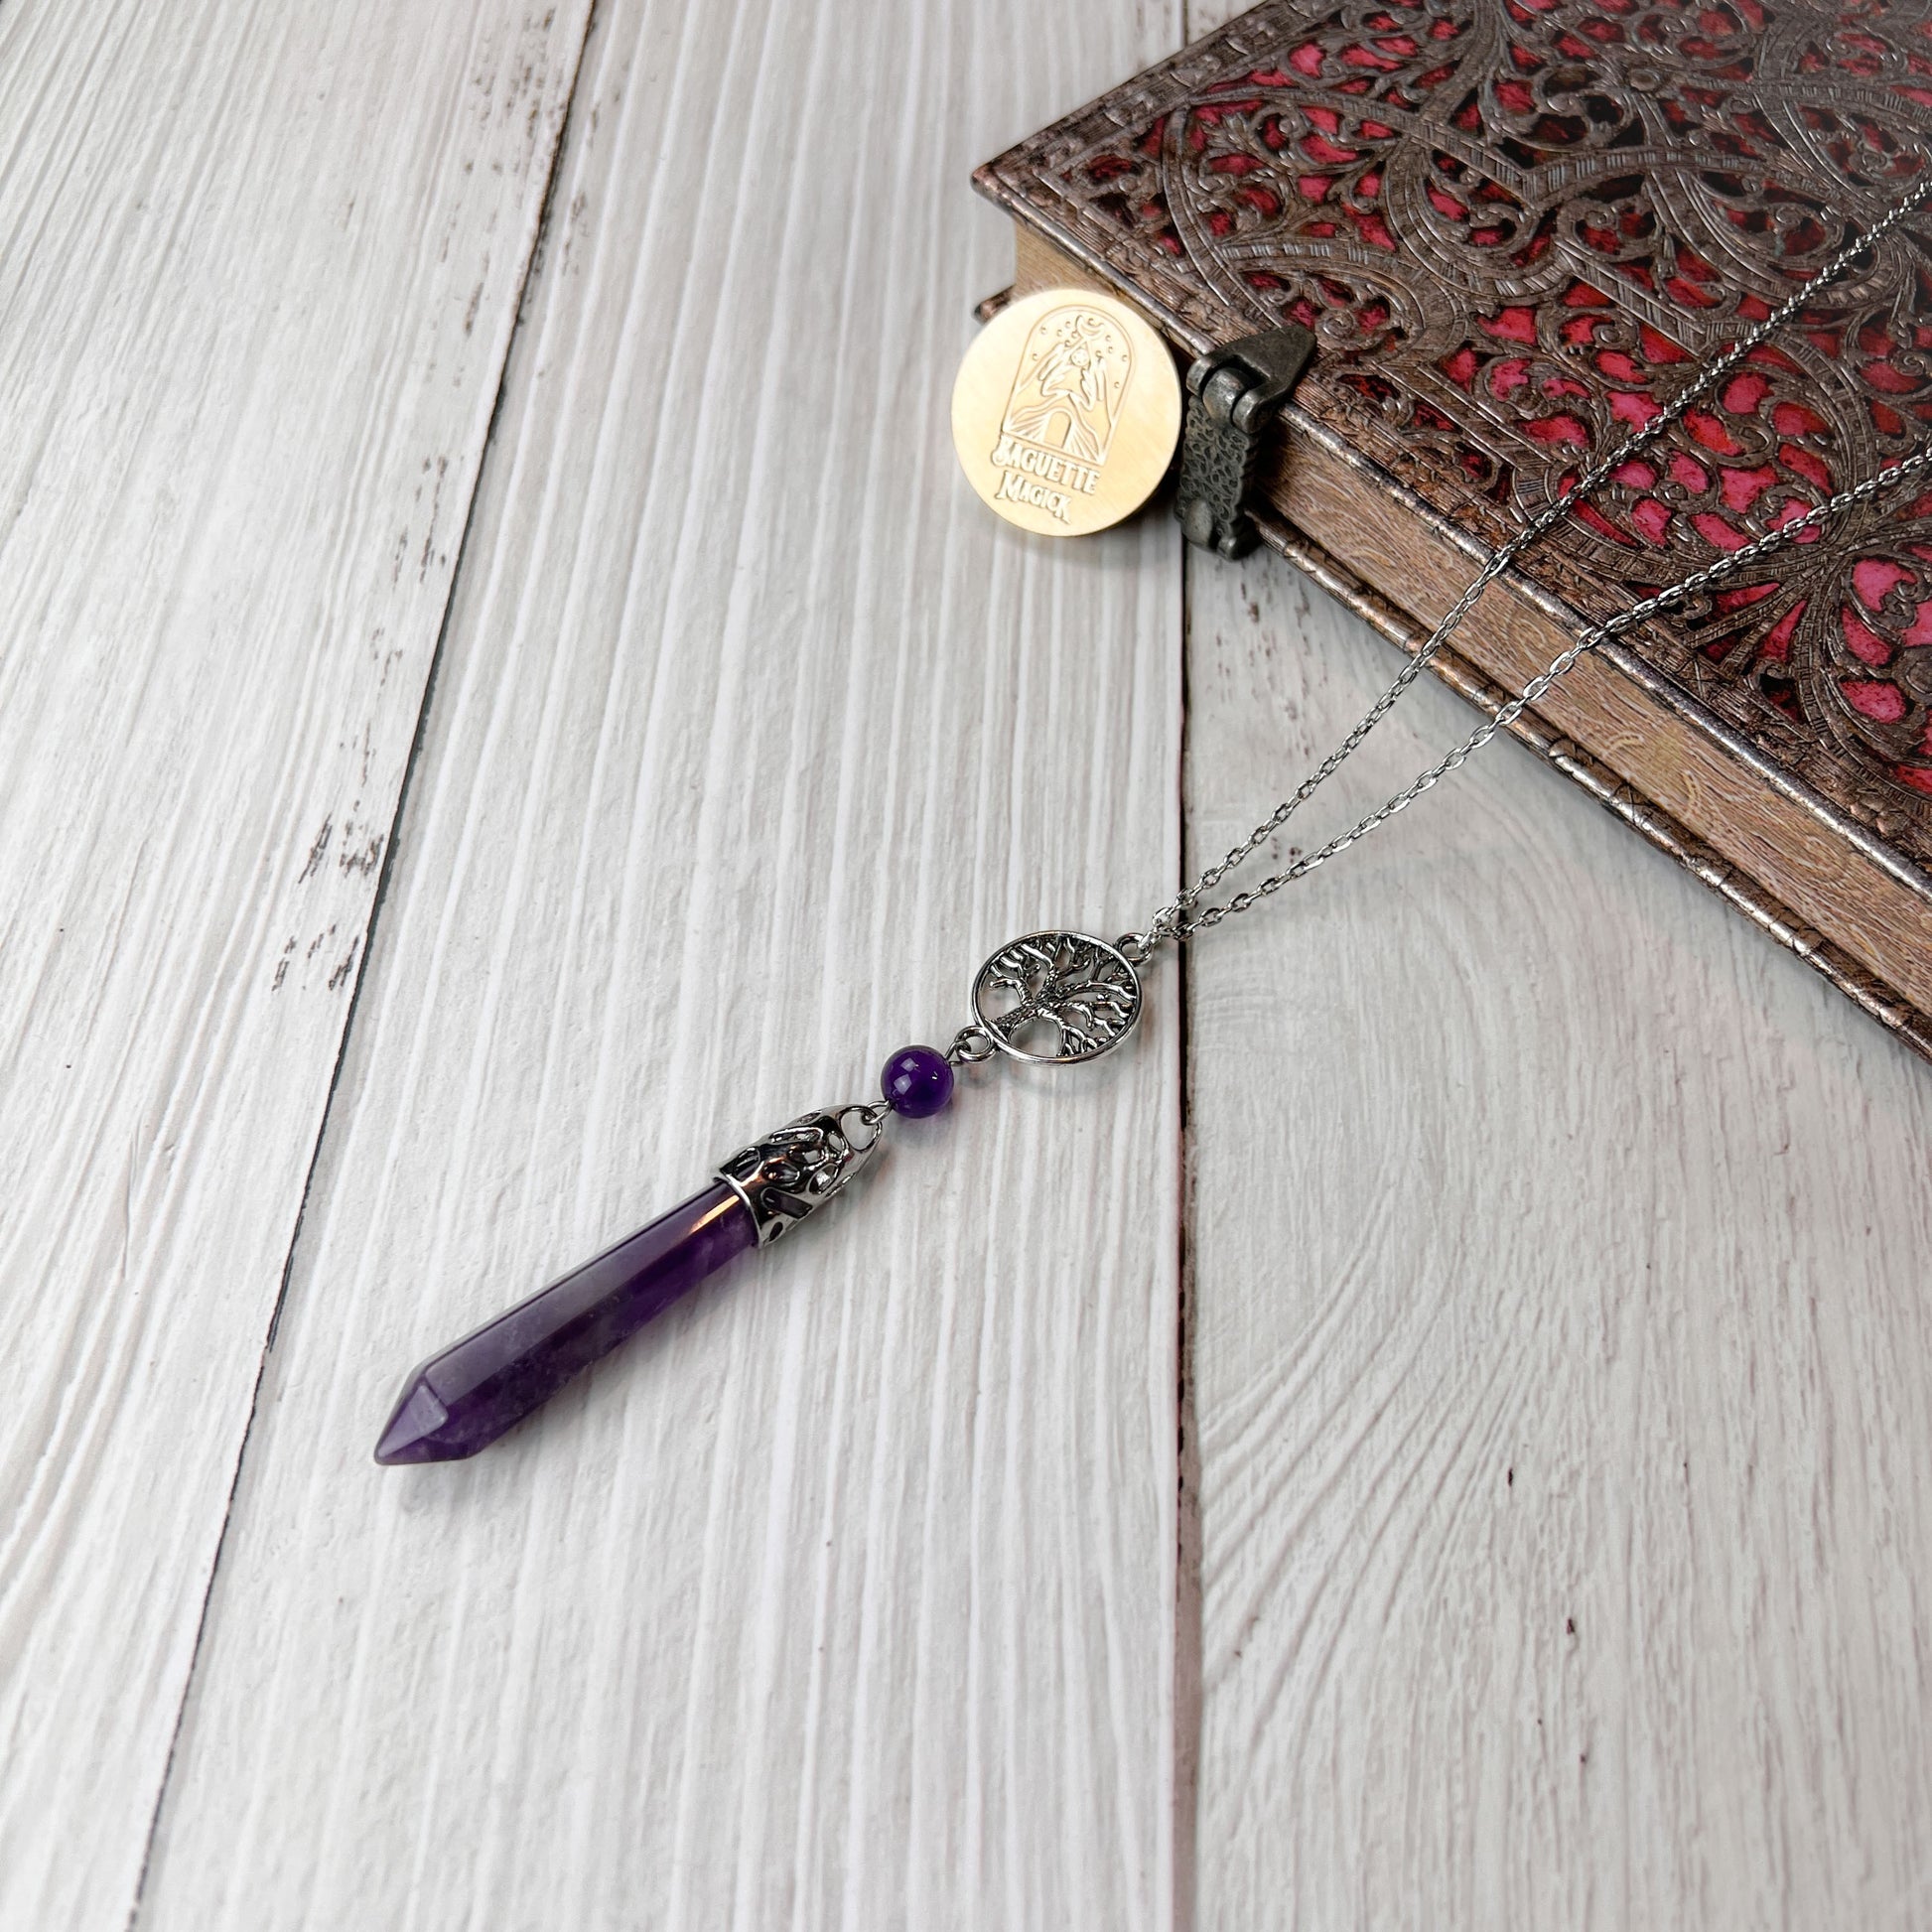 amethyst and tree of life pendulum necklace spiritual pagan yggdrasil jewelry for gothic witch baguette magick